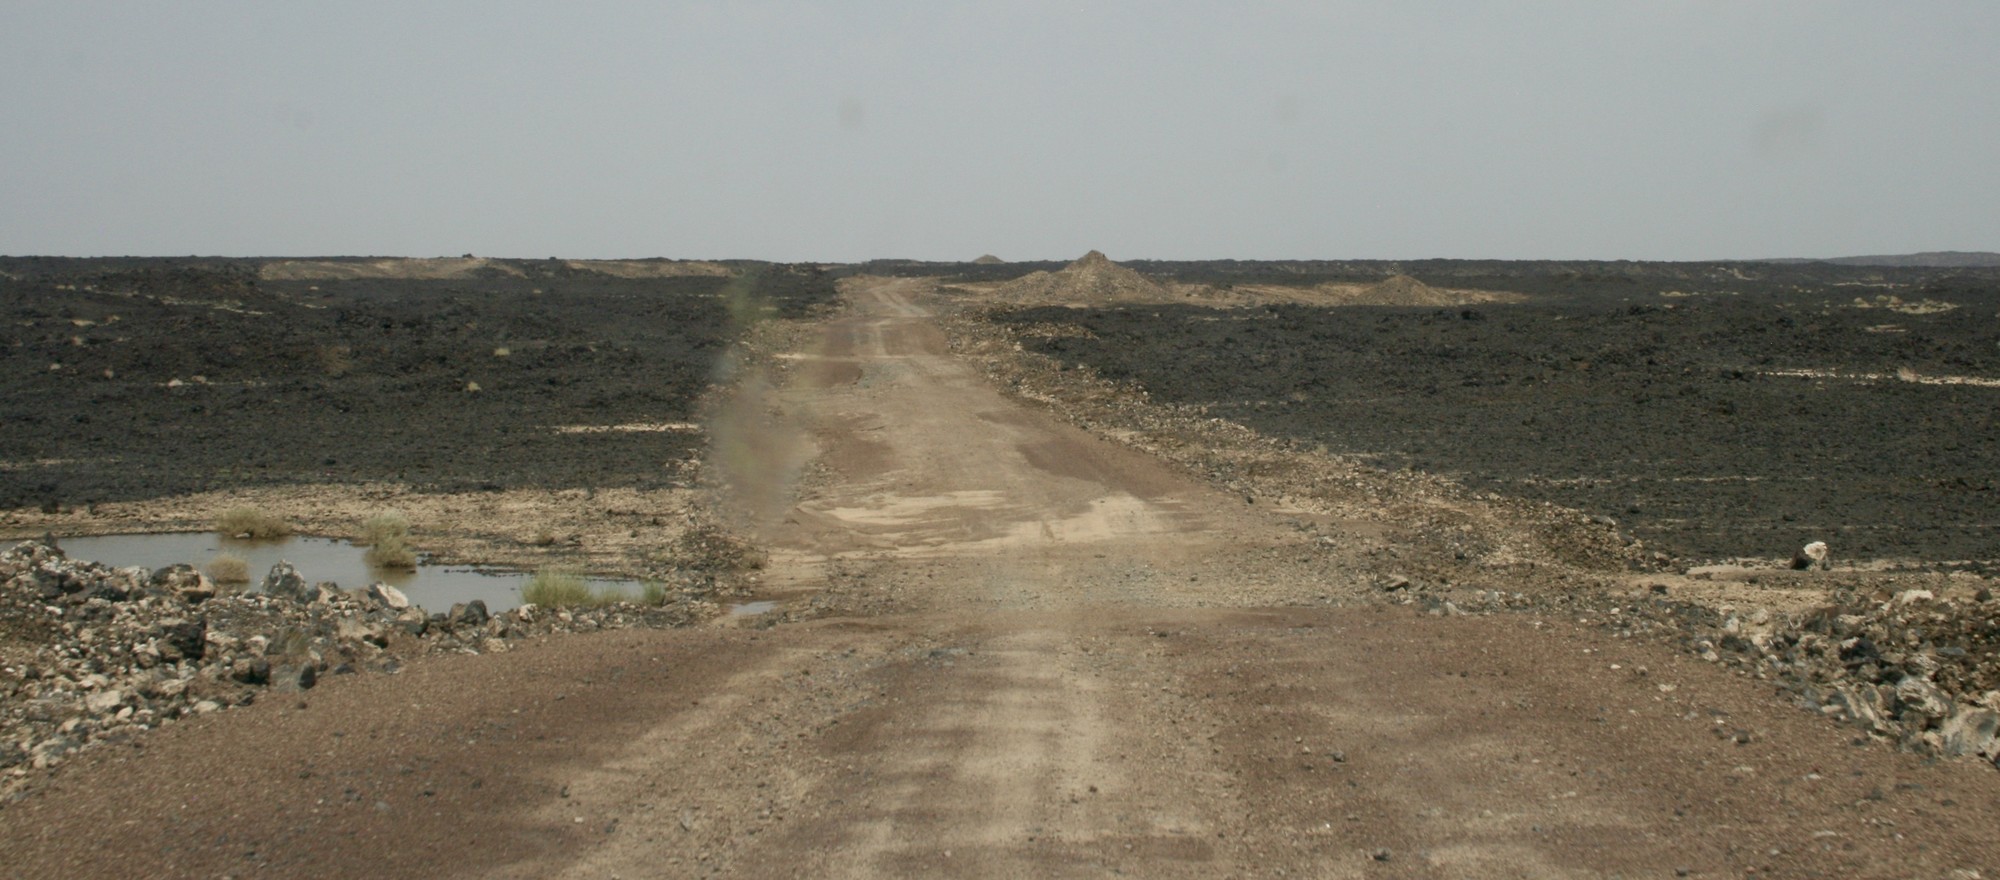 A dirt road in a desert of Ethiopia